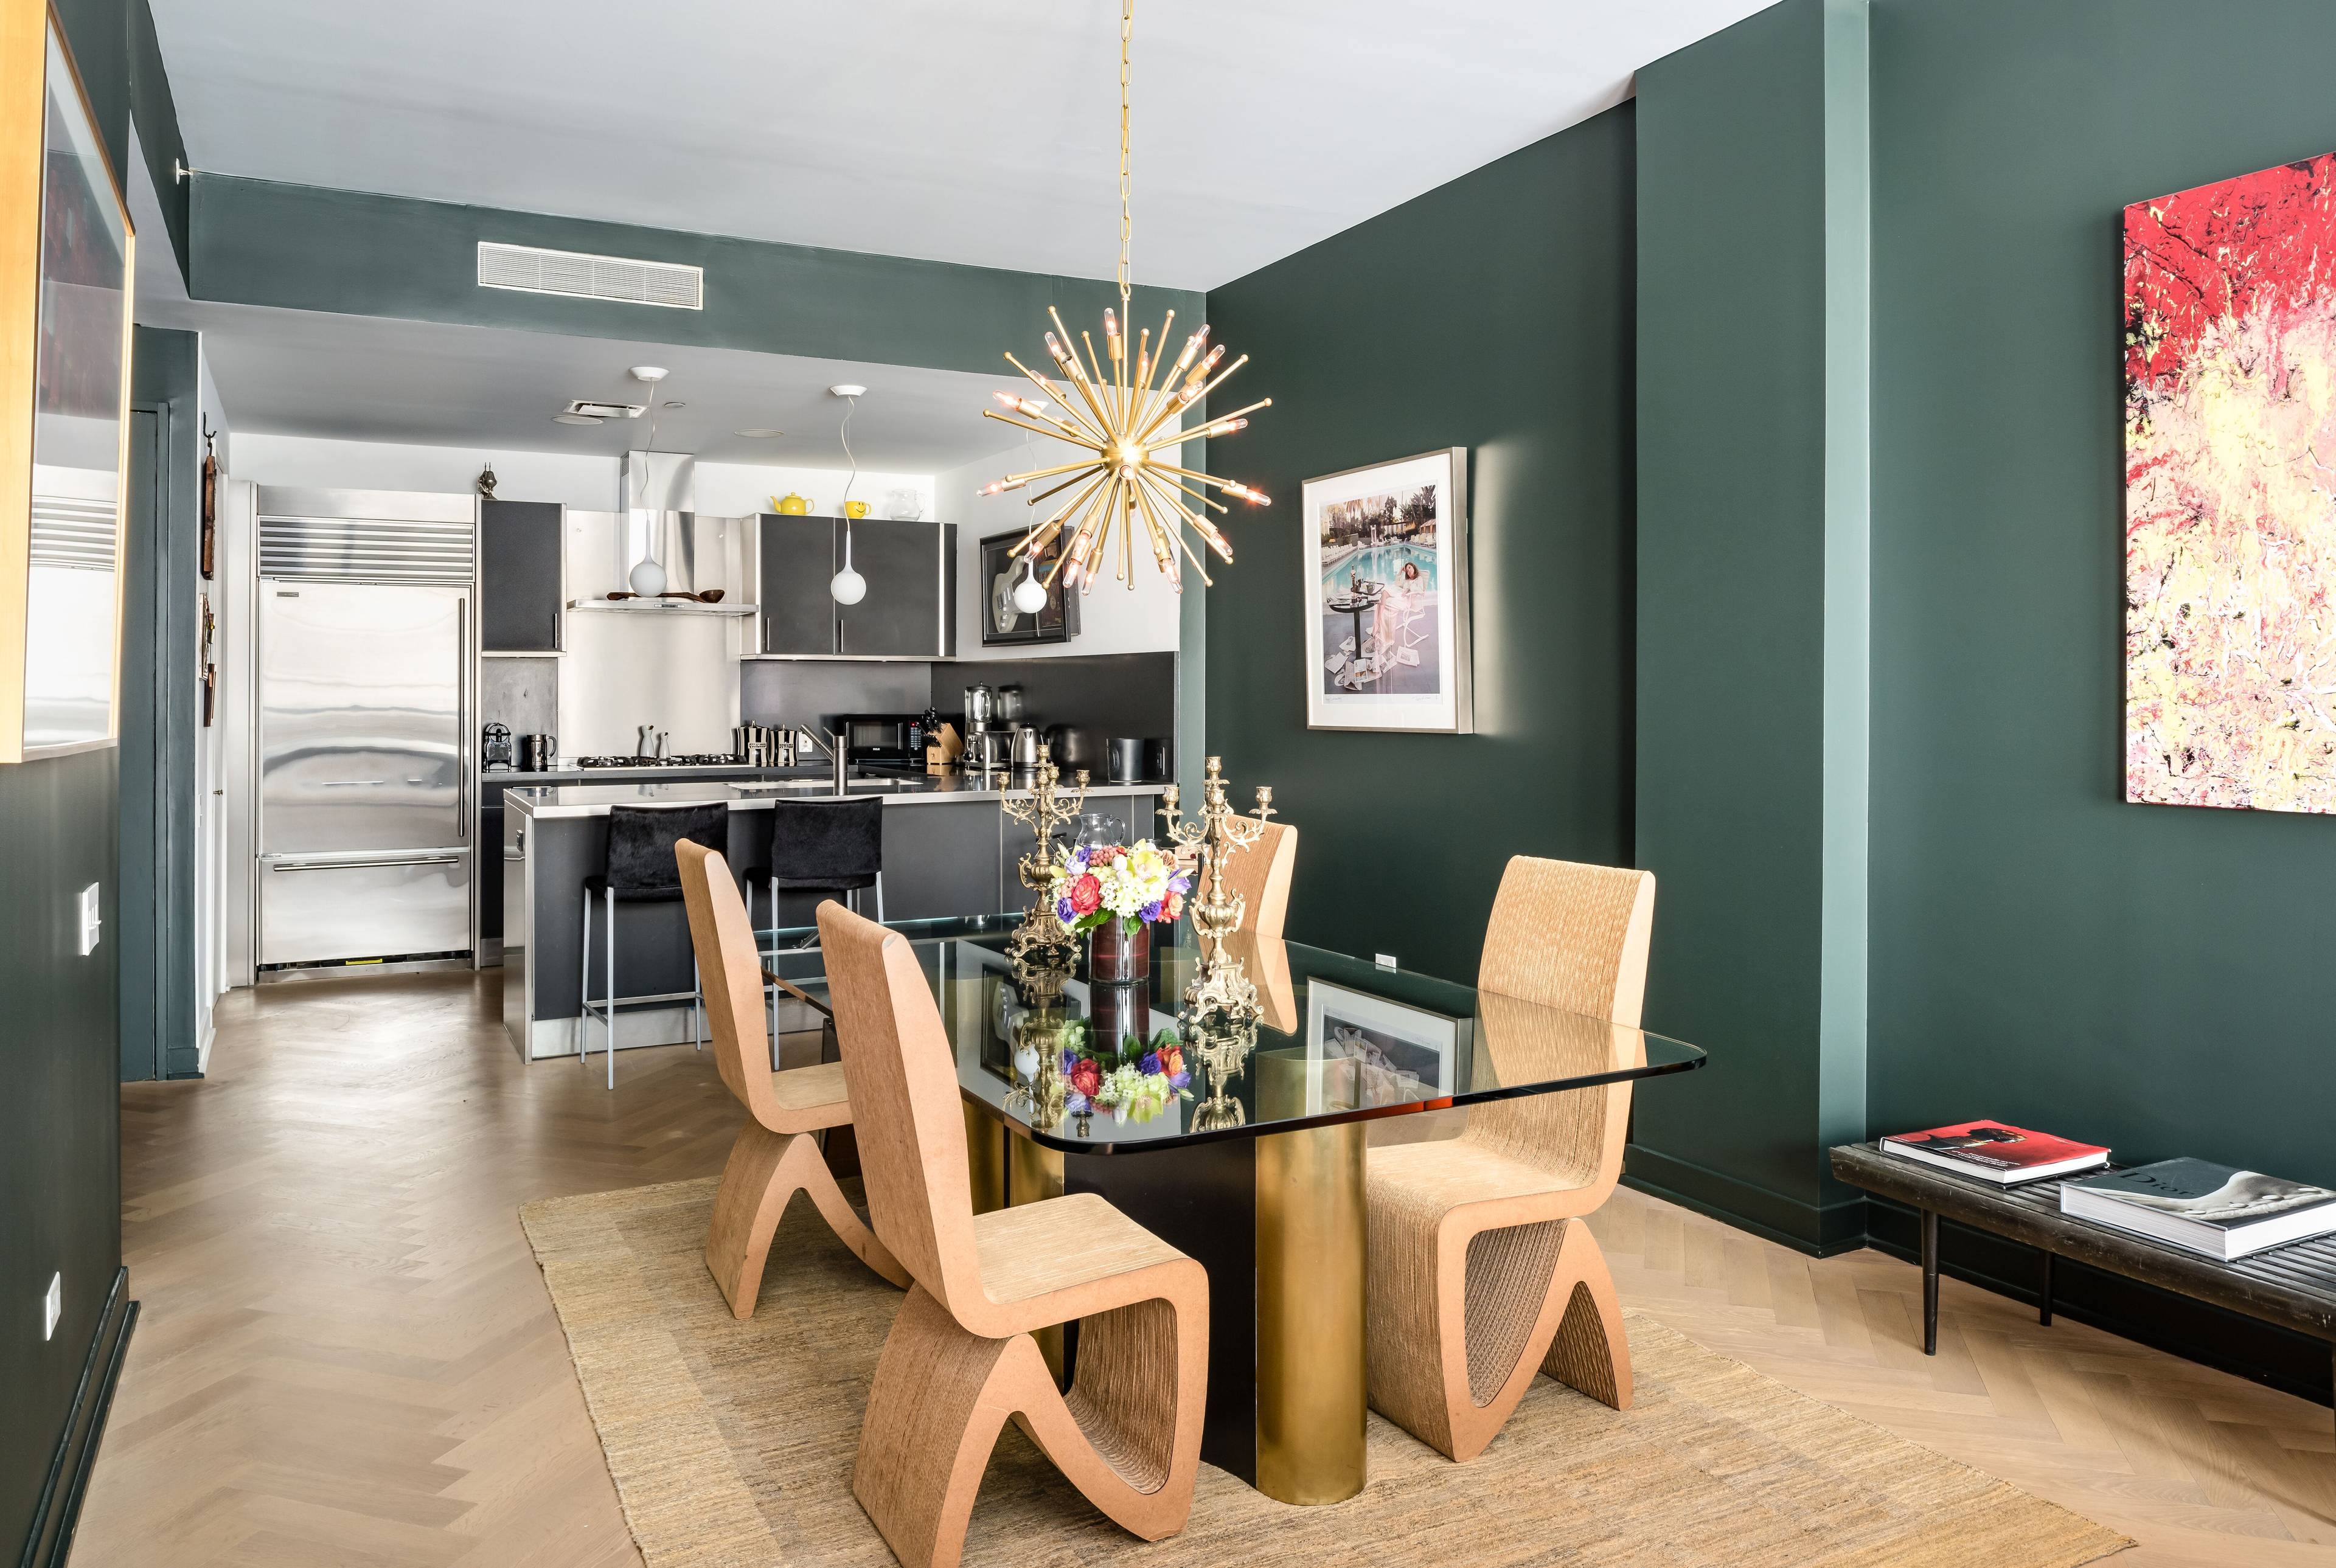 This beautifully designed home offers luxury living near the Hudson River, Tribeca, SoHo and West Village 2 bedrooms, 2 full baths, ten foot ceilings, white oak herringbone floors, and floor ...